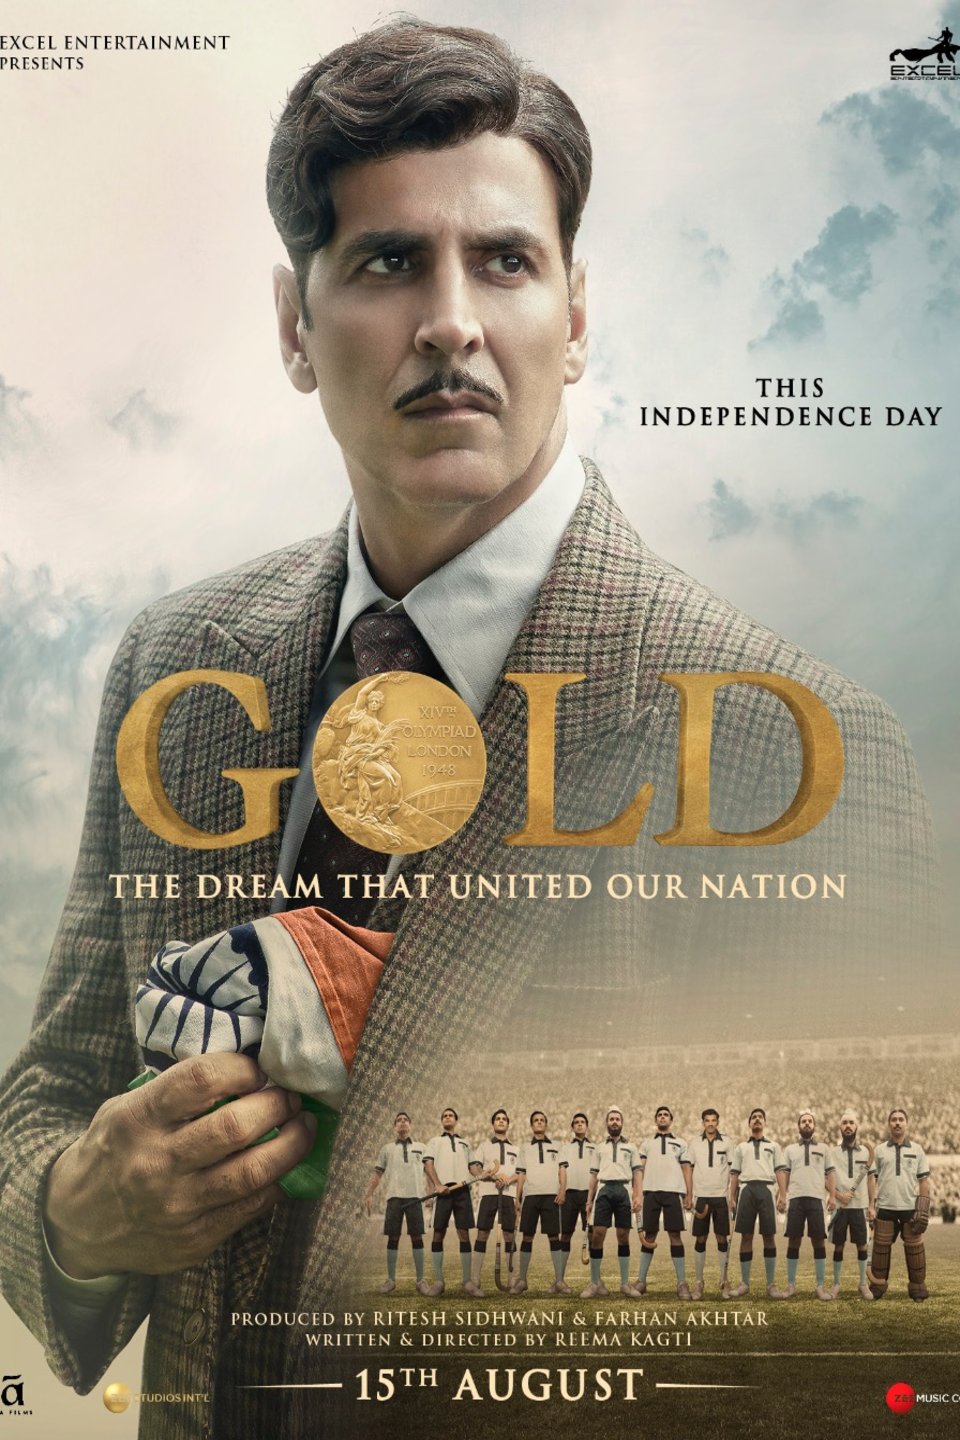 Hindi poster of the movie Gold: The Dream that United Our Nation